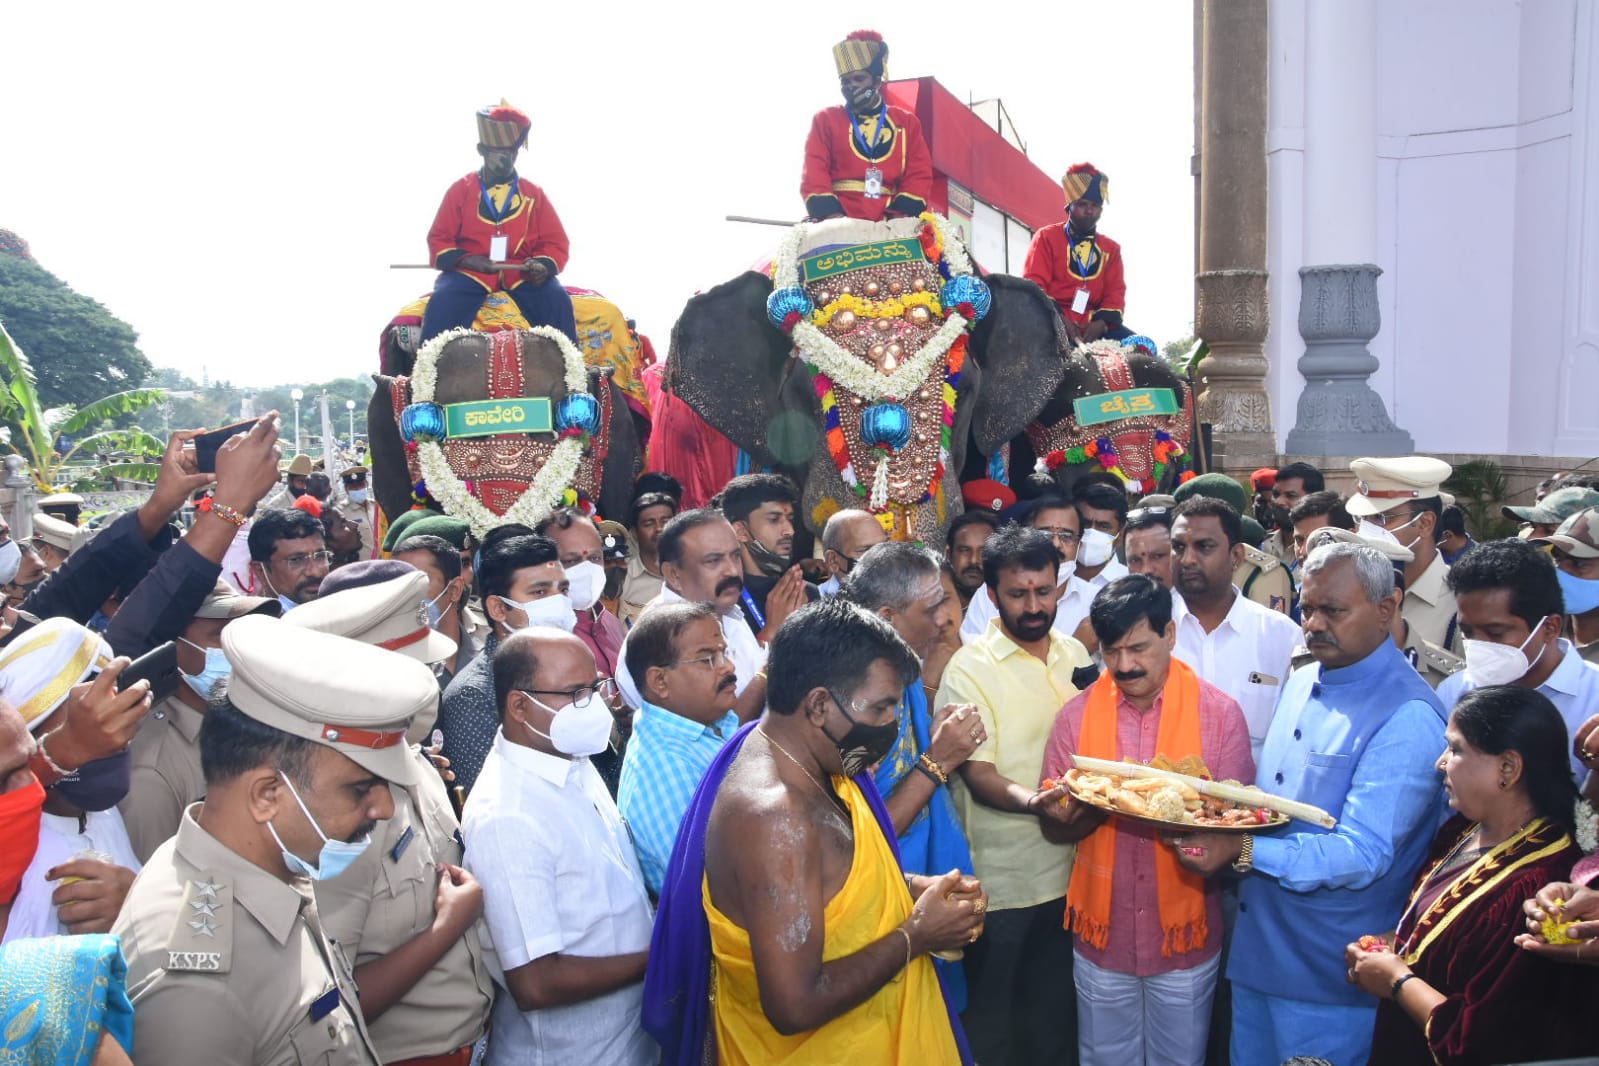 details about dasara elephants weight